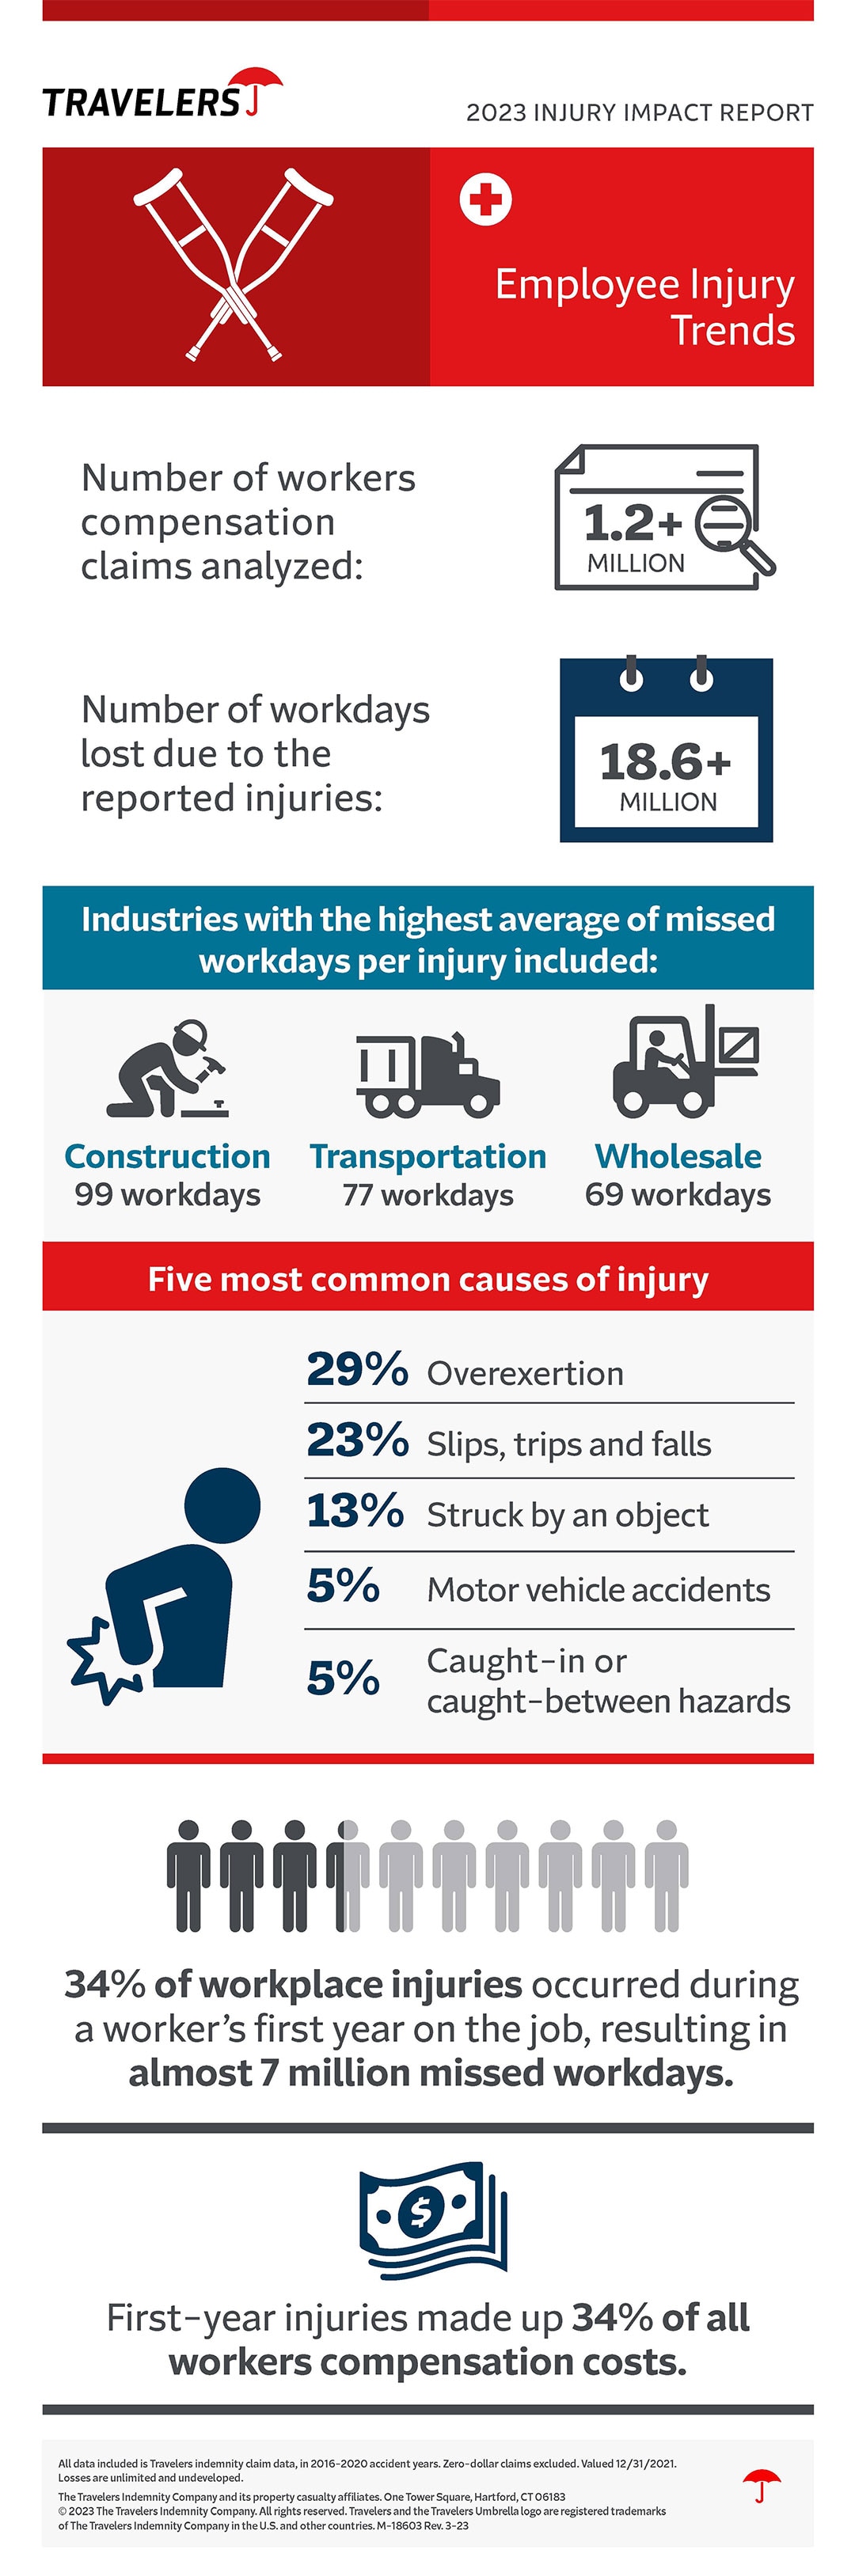 2023 Injury Impact Report infographic, see details below